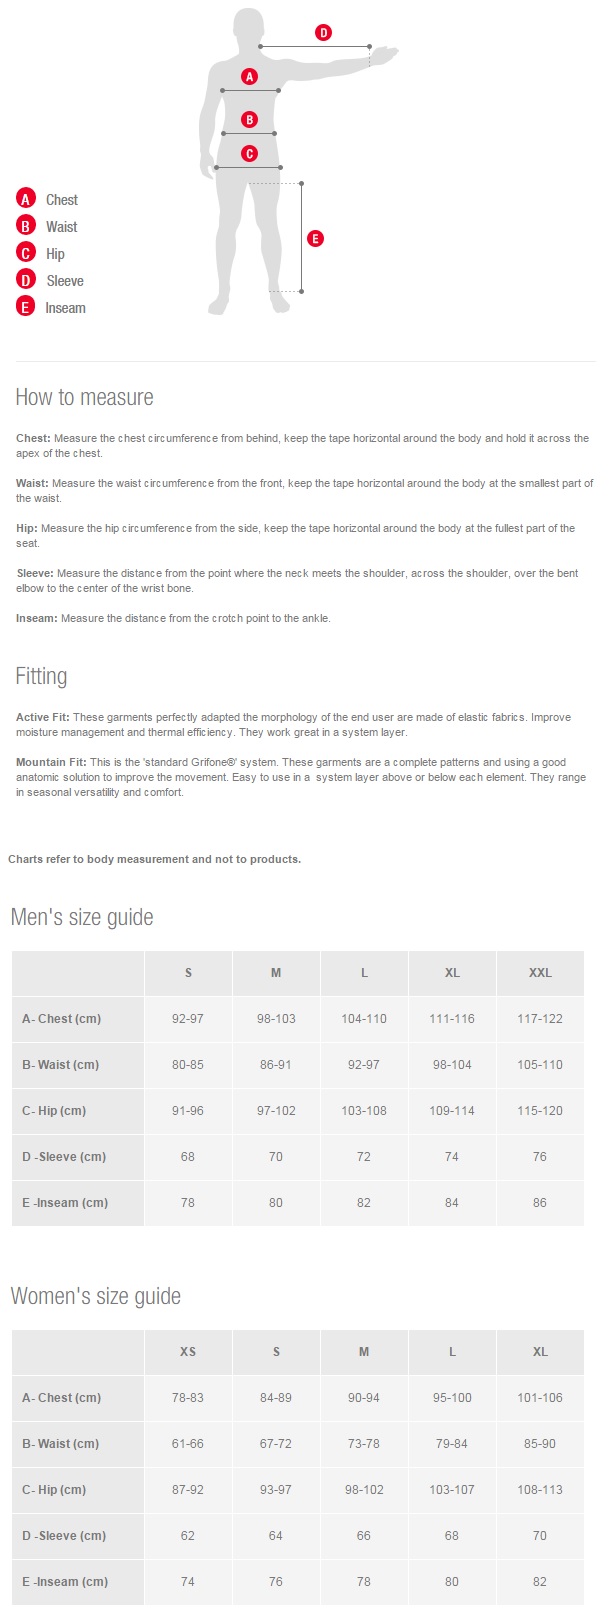 Grifone Size Guide